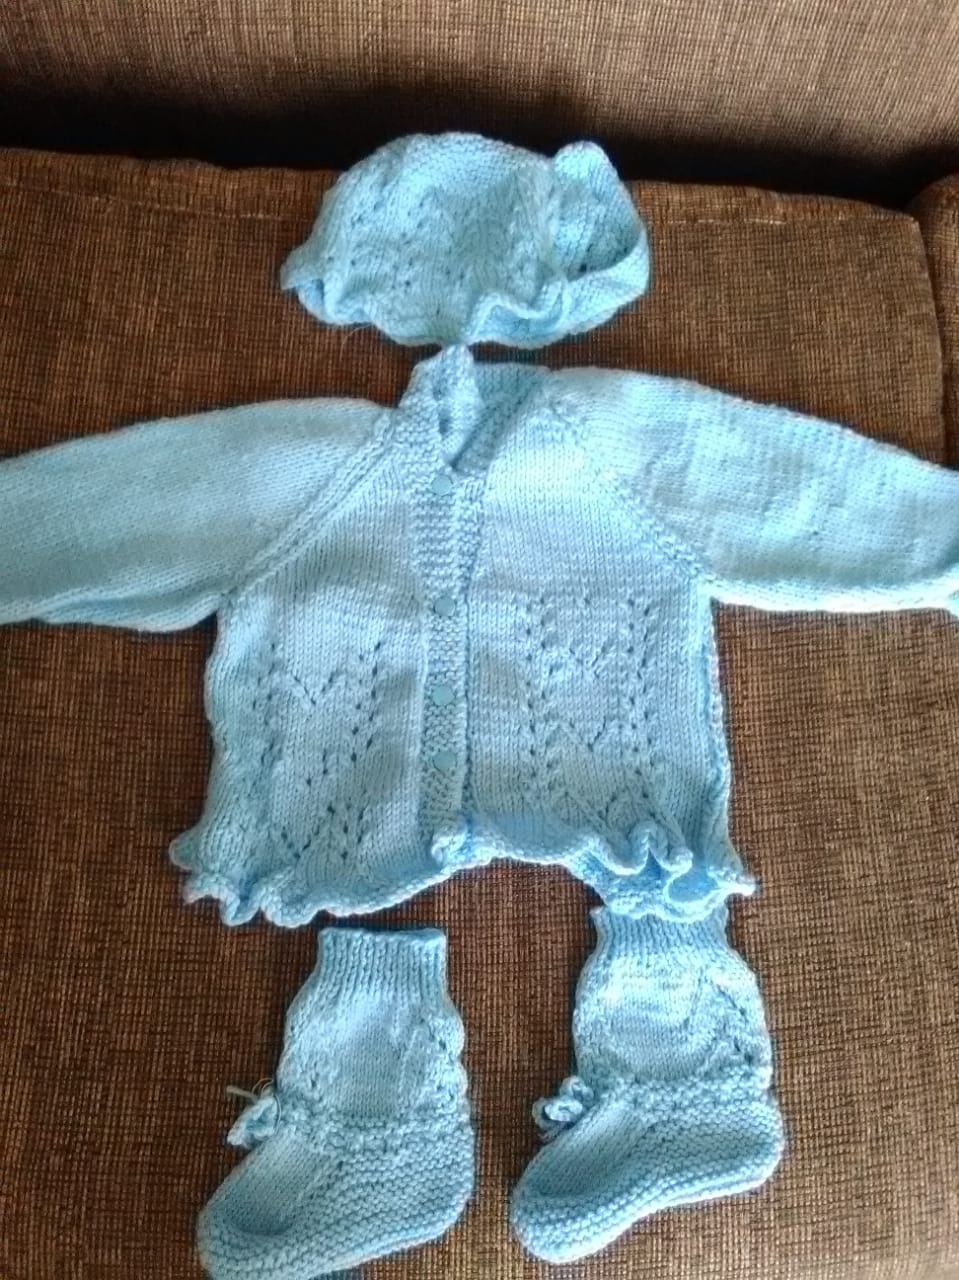 homemade knitted baby clothes